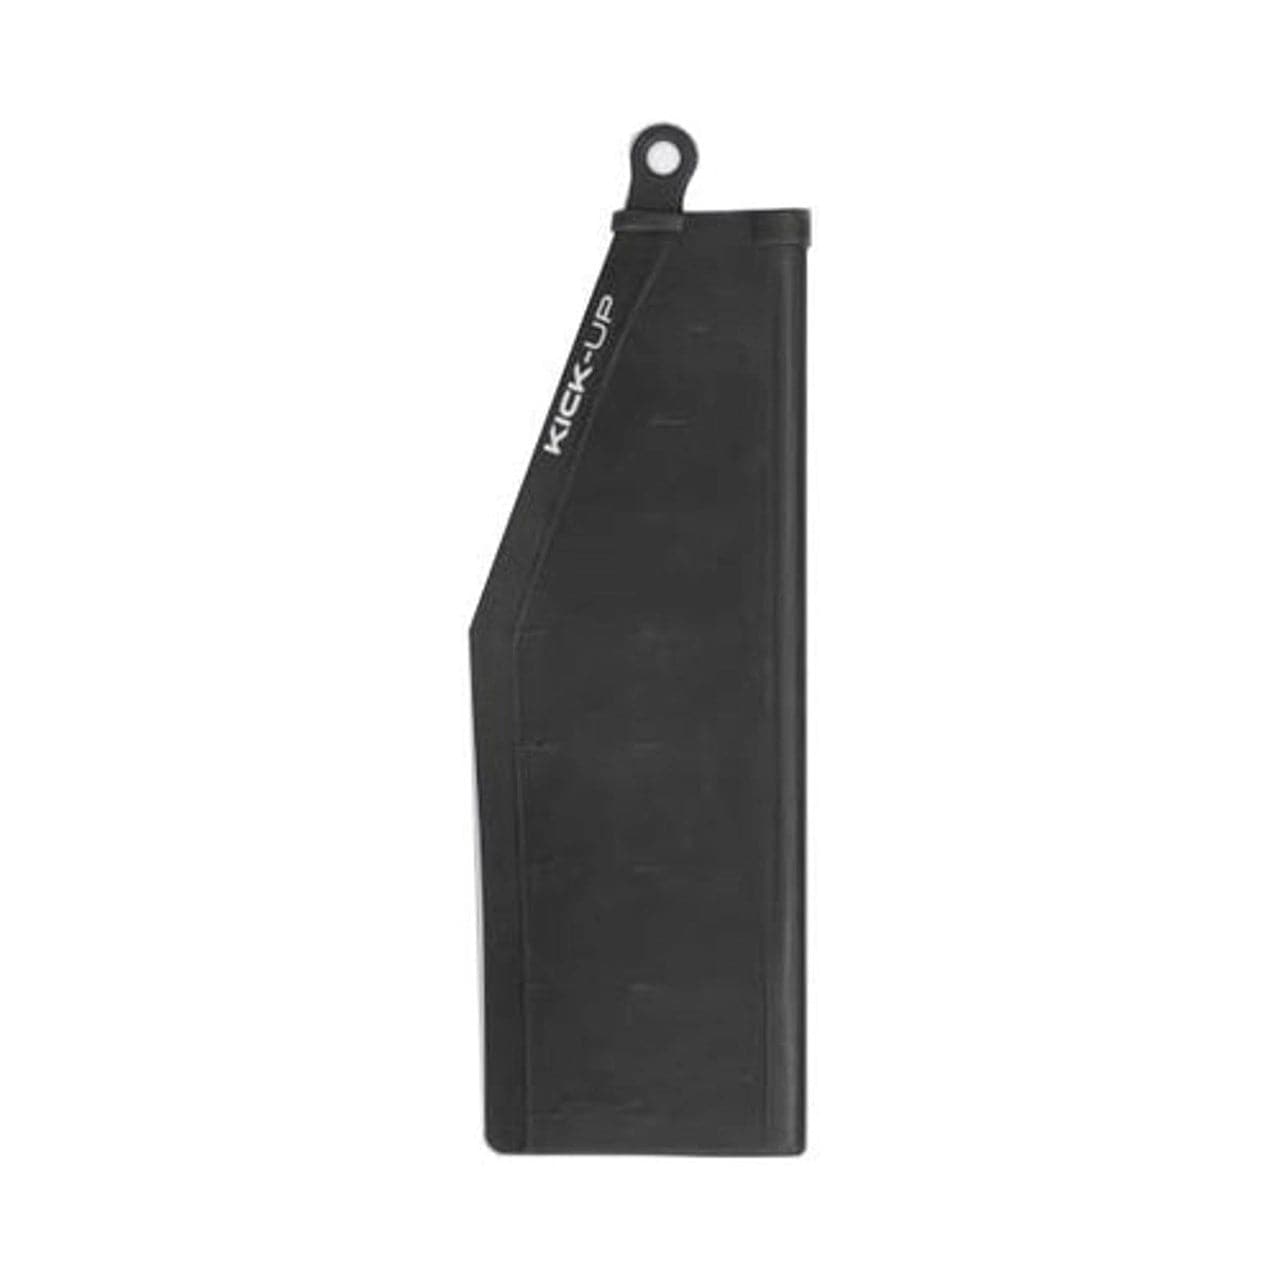 Featuring the MirageDrive Kick Up Fin hobie accessory, replacement fin manufactured by Hobie shown here from one angle.